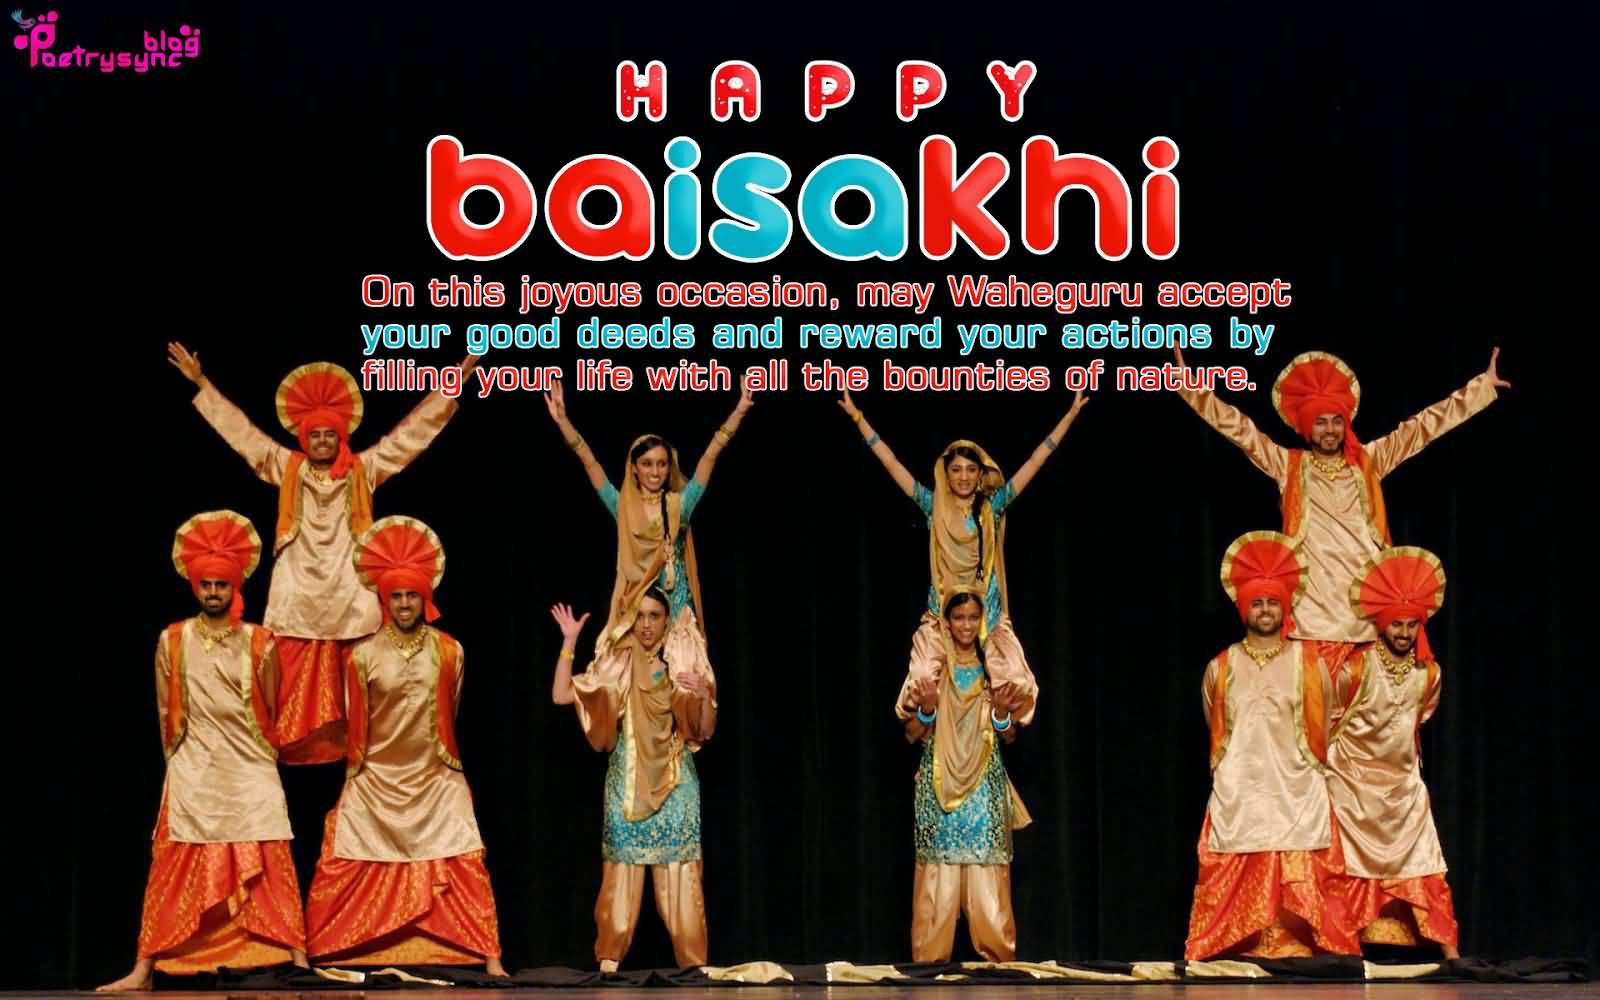 Happy Baisakhi On This Joyous Occasion, May Waheguru Accept Your Good Deeds And Reward Your Actions By Filling Your Life With All The Bounties Of Nature